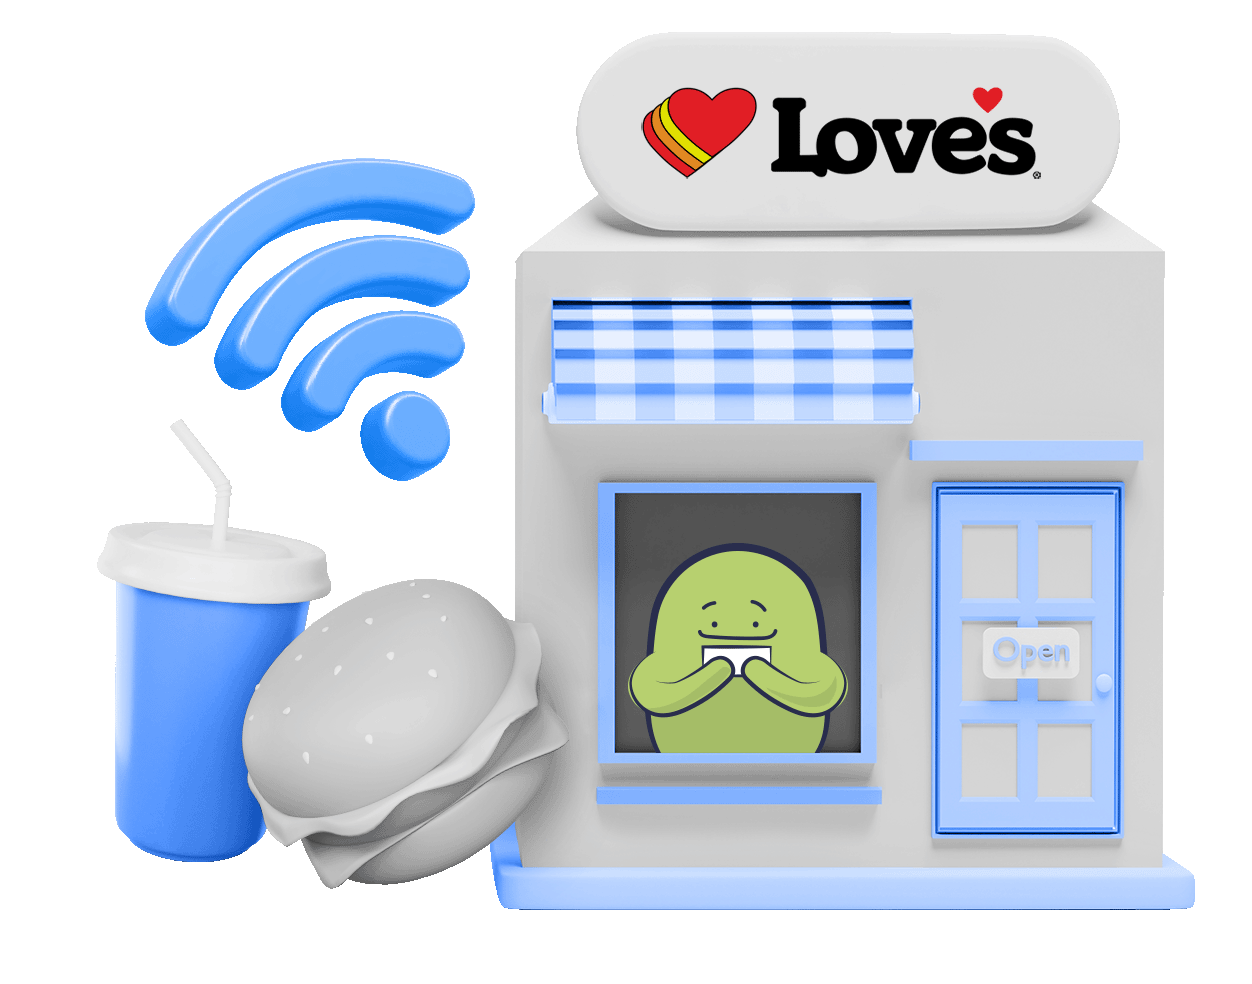 How to connect to Love’s WiFi safely